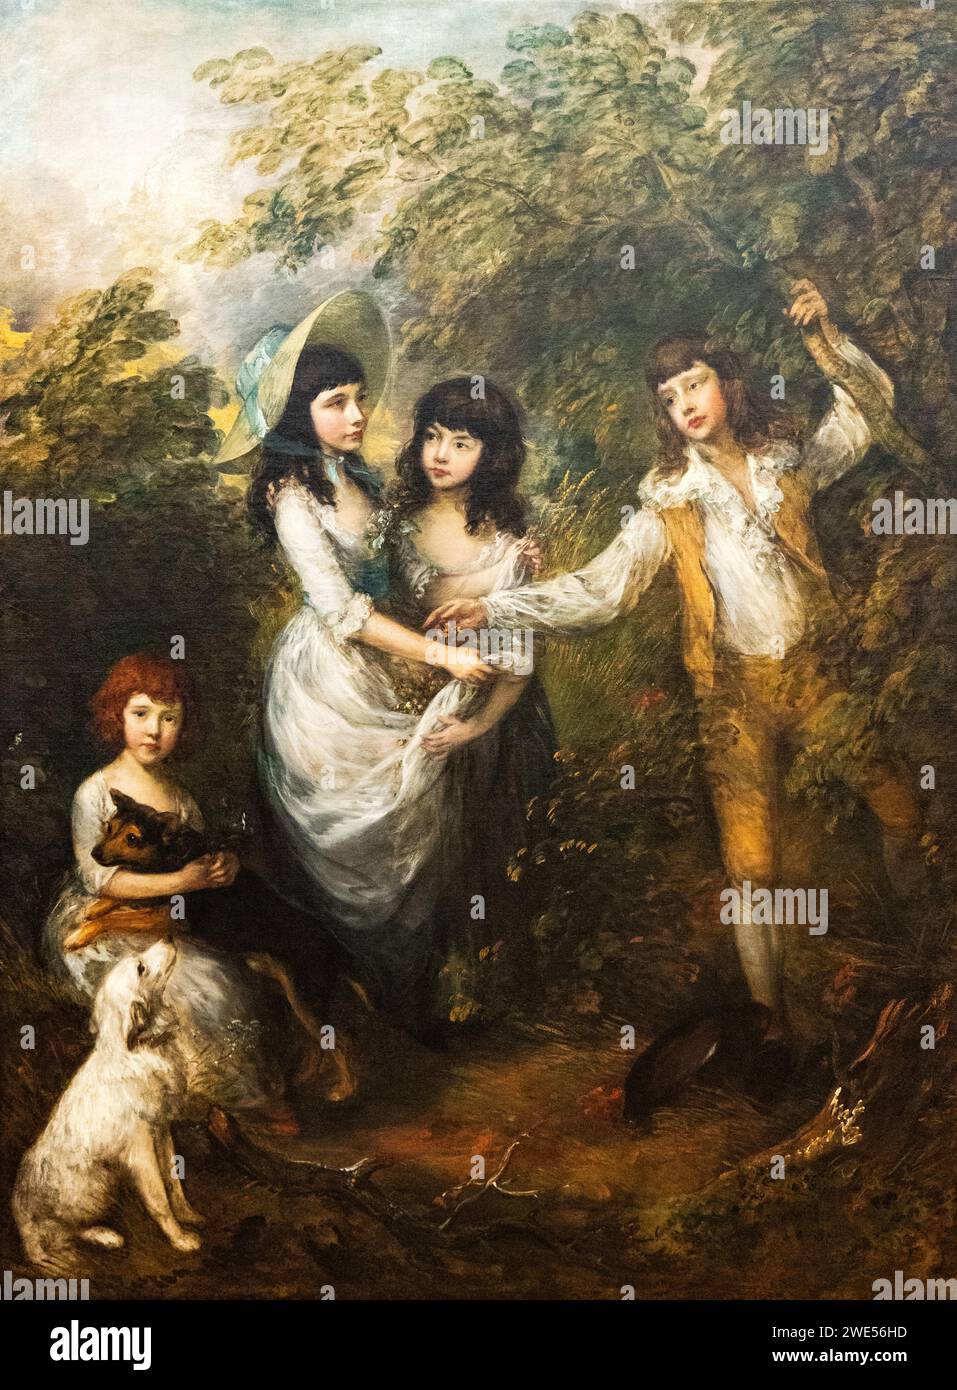 Thomas Gainsborough painting, 'The Marsham Children', 1787, oil on canvas. Rococo style 18th century painting by British painter Gainsborough Stock Photo